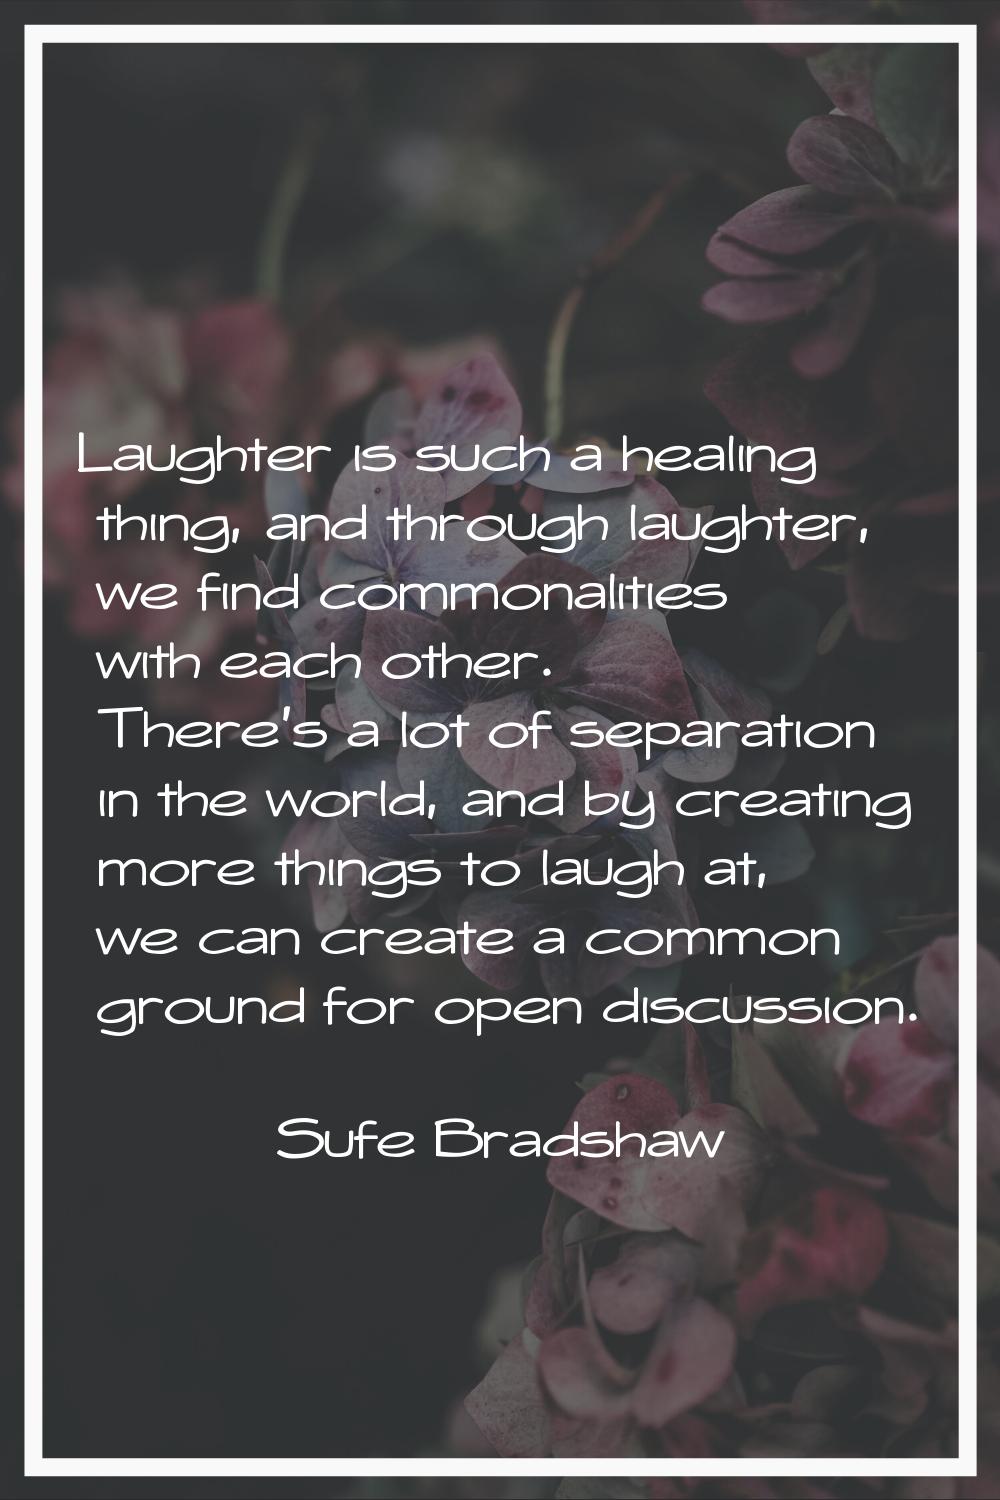 Laughter is such a healing thing, and through laughter, we find commonalities with each other. Ther